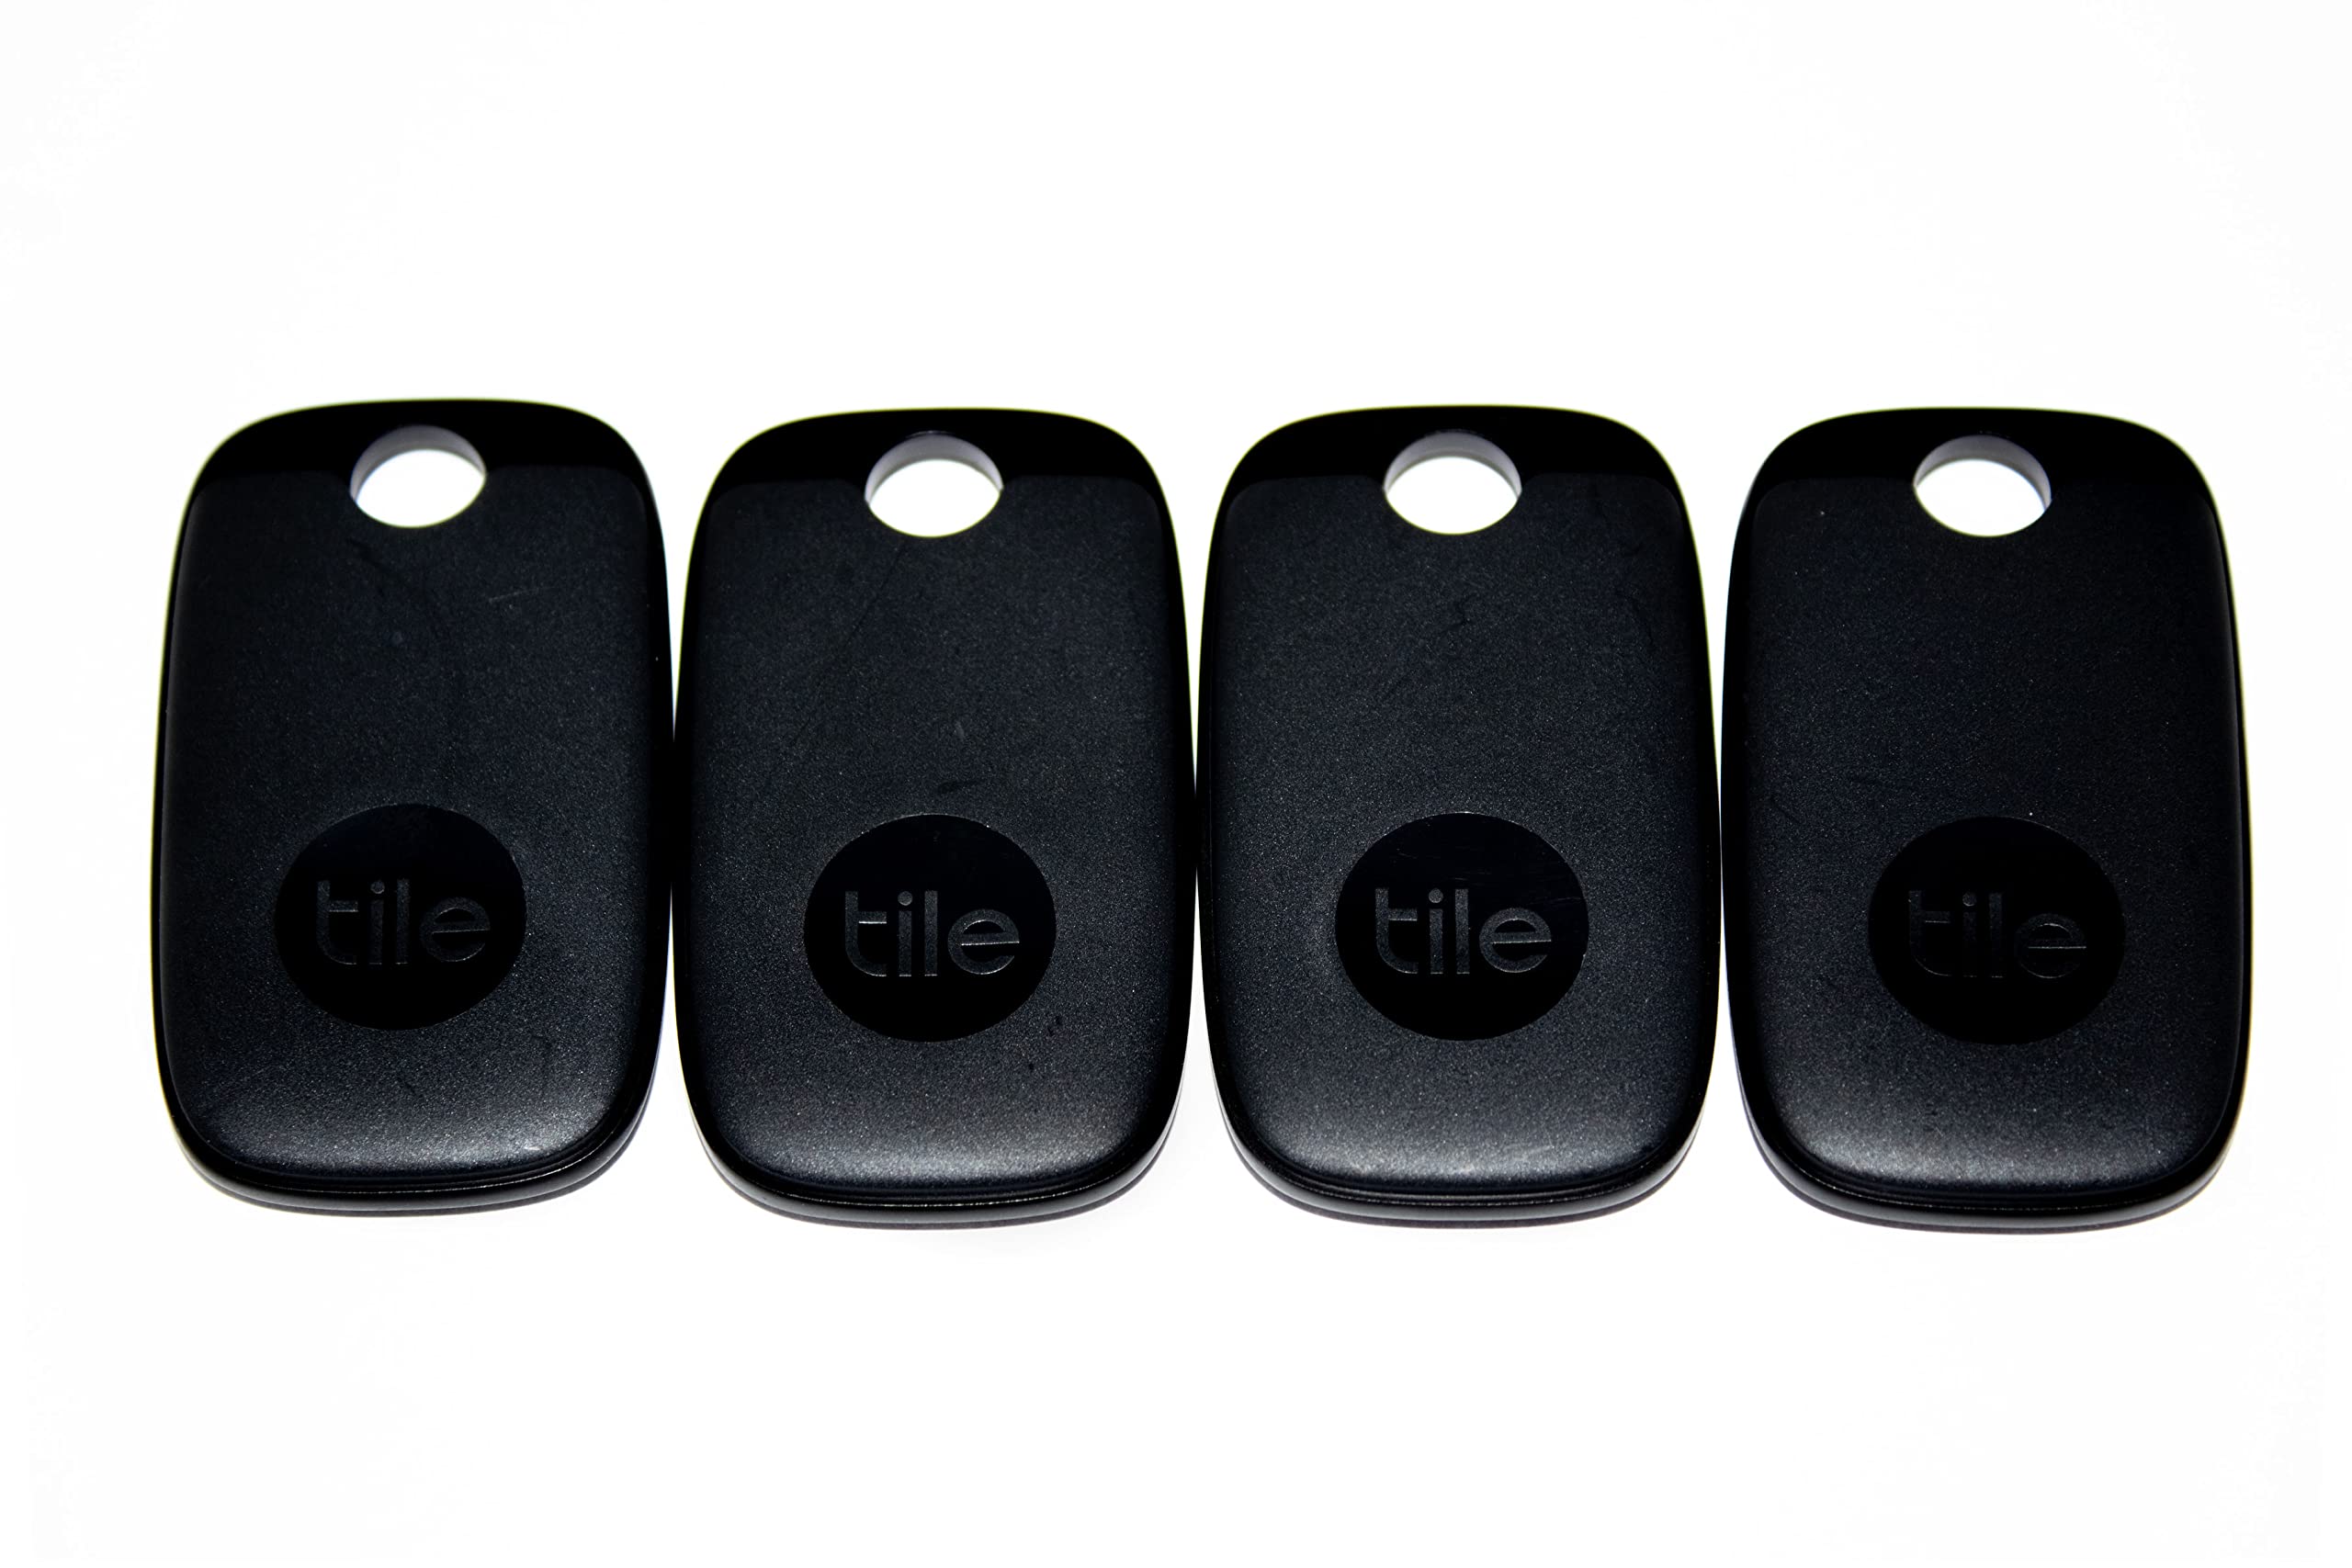 Tile Pro (2022) 4-Pack. Powerful Bluetooth Tracker, Keys Finder and Item Locator for Keys, Bags, and More; Up to 400 ft Range. Water-Resistant. Phone Finder. iOS and Android Compatible.